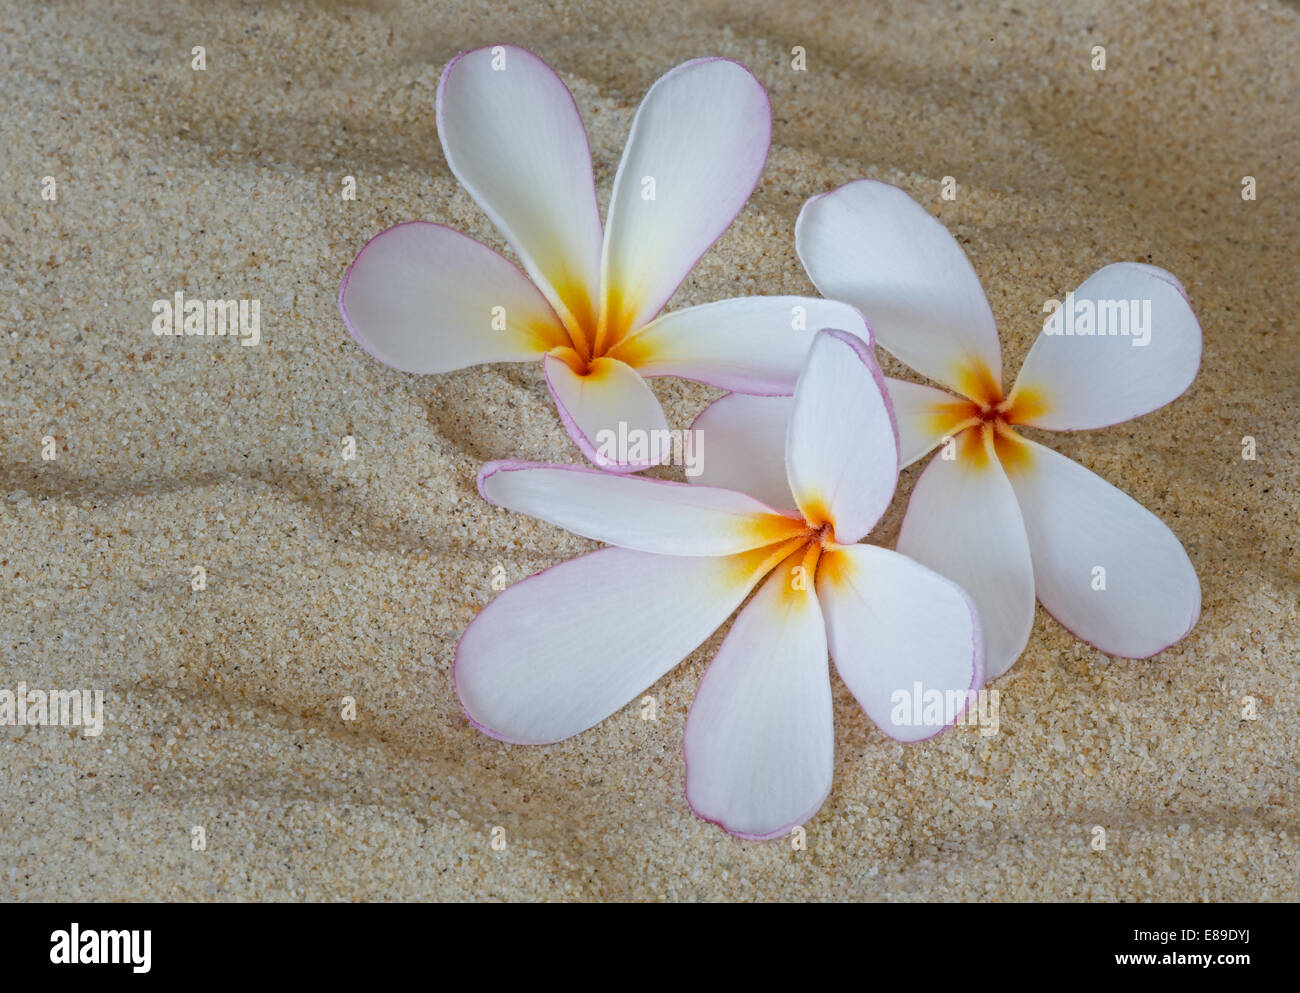 Hawaiian Tropical Plumeria (common name Frangipani) is a genus of flowering plants in the dogbane family, Apocynaceae. These particular blooms are white and pink with bright yellow in the center and are sitting on top of beach sand.. Plumerias are tropical trees famous for their gorgeous flowers which are used to make leis (floral garlands). Stock Photo